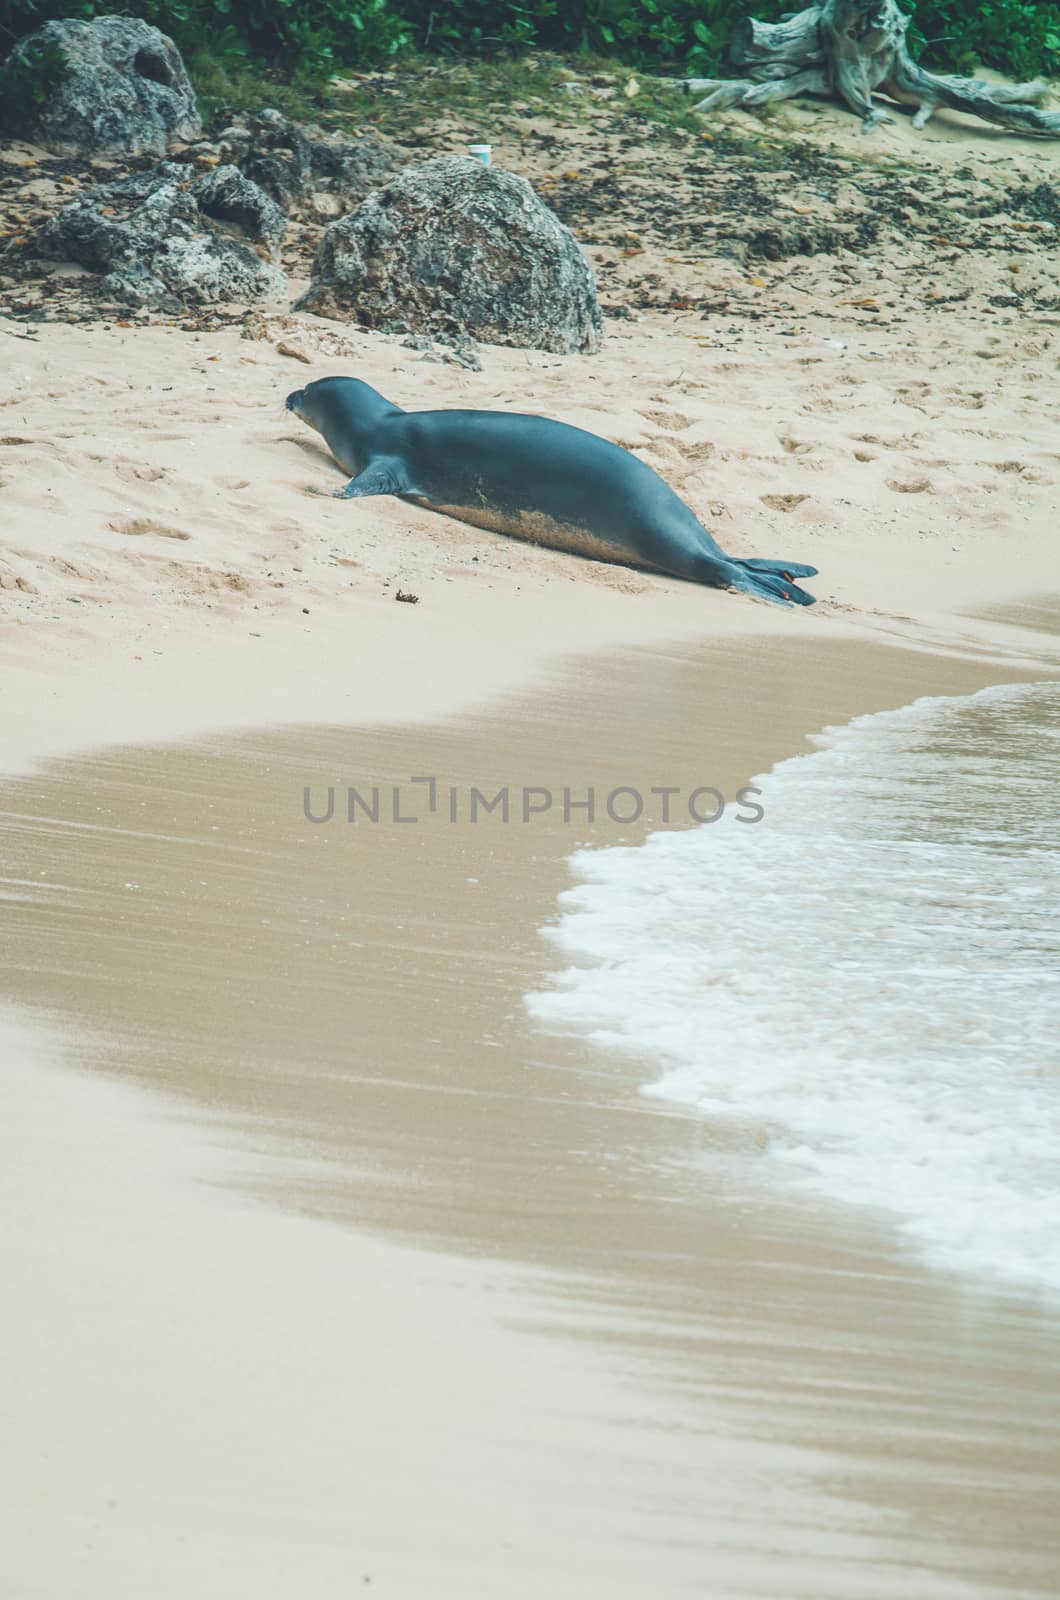 Monk seals are found in the Hawaiian archipelago, certain areas in the Mediterranean Sea and formerly in the tropical areas of the west Atlantic Ocean.